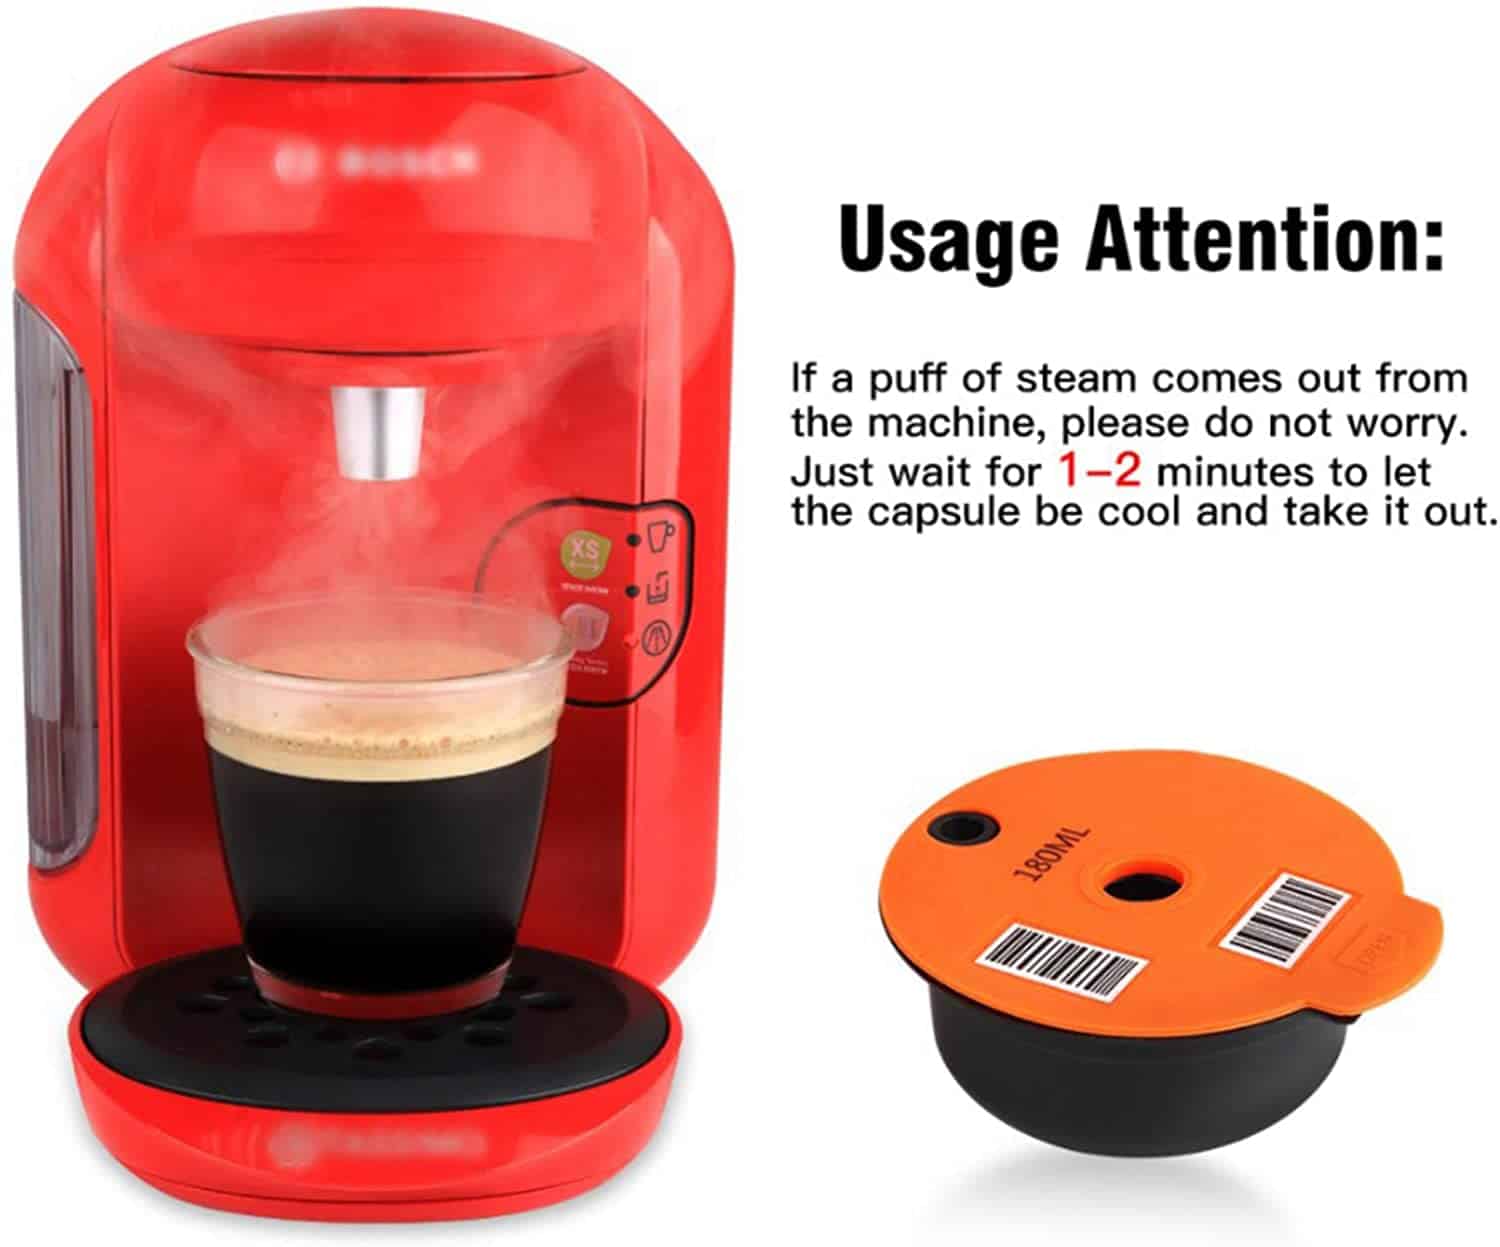 The refillable coffee pods for Tassimo usage instructions